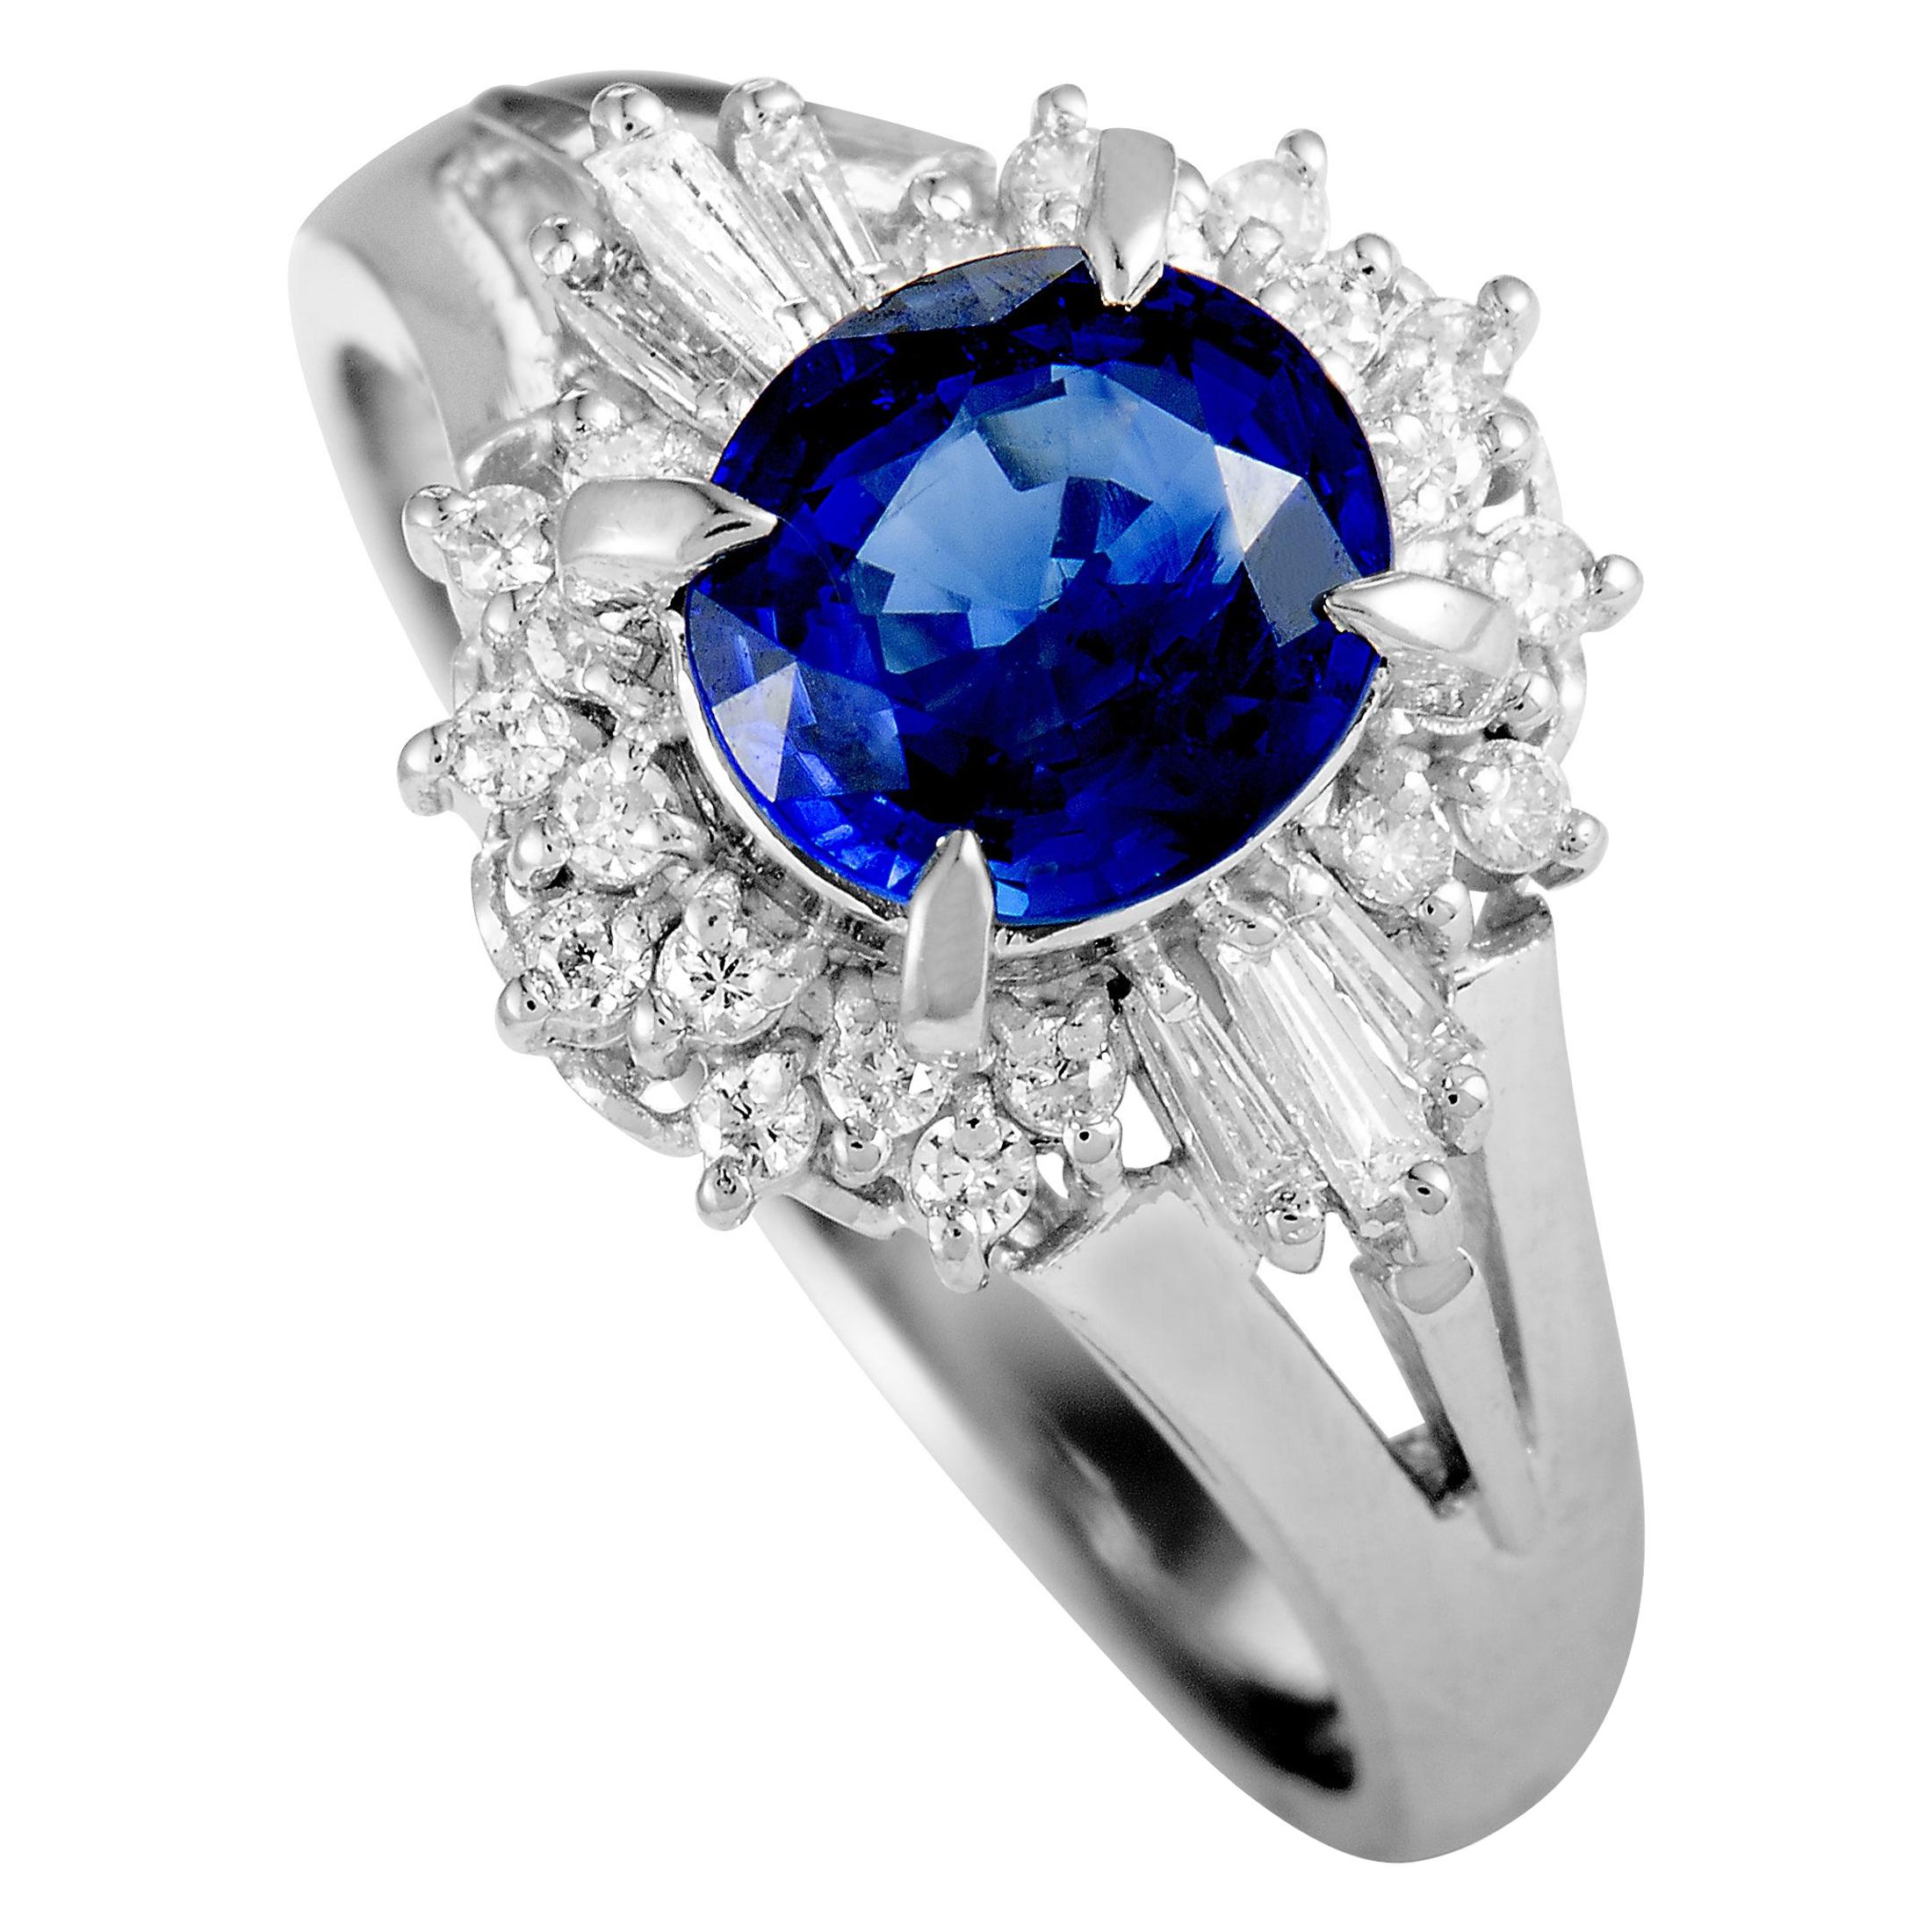 Platinum Round and Tapered Baguette Diamonds and Sapphire Ring